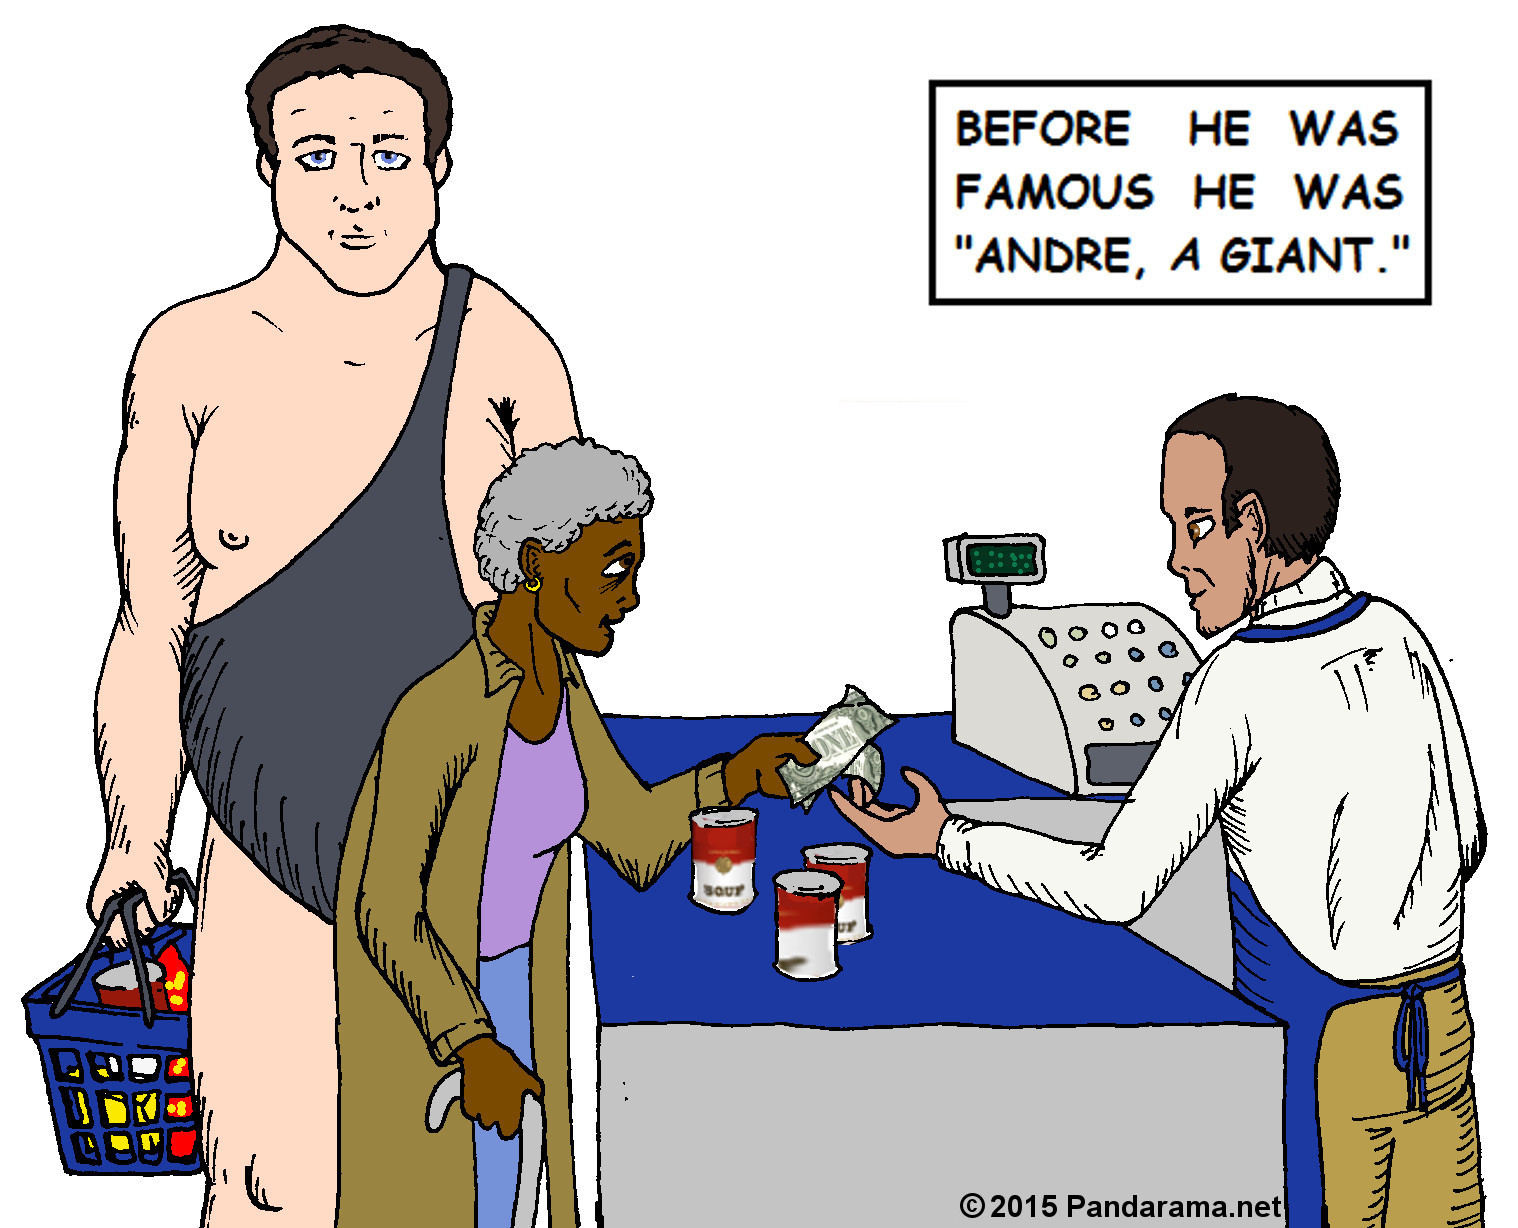 Before he was Andre the Giant, he was Andre a Giant, by Pandarama.